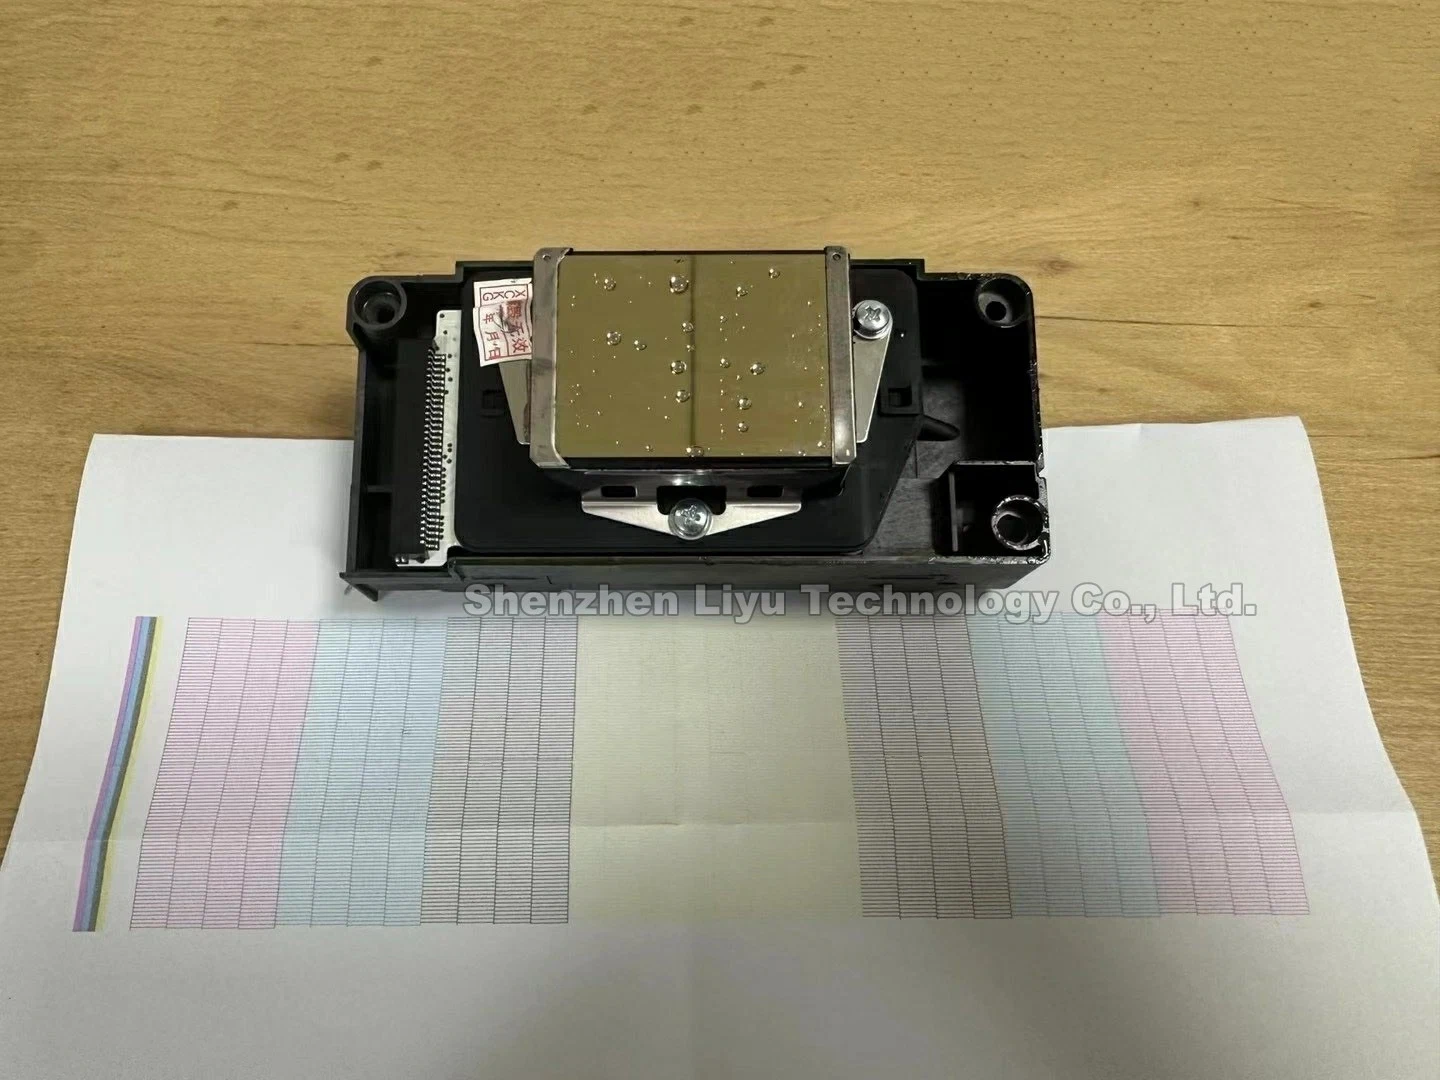 Second Hand Epson Dx5 Unlock Print Head Epson Dx5 Unlocked F186000 for All Chinese Brand Inkjet Printers Used and Test Welk Epson Dx5 Print Head